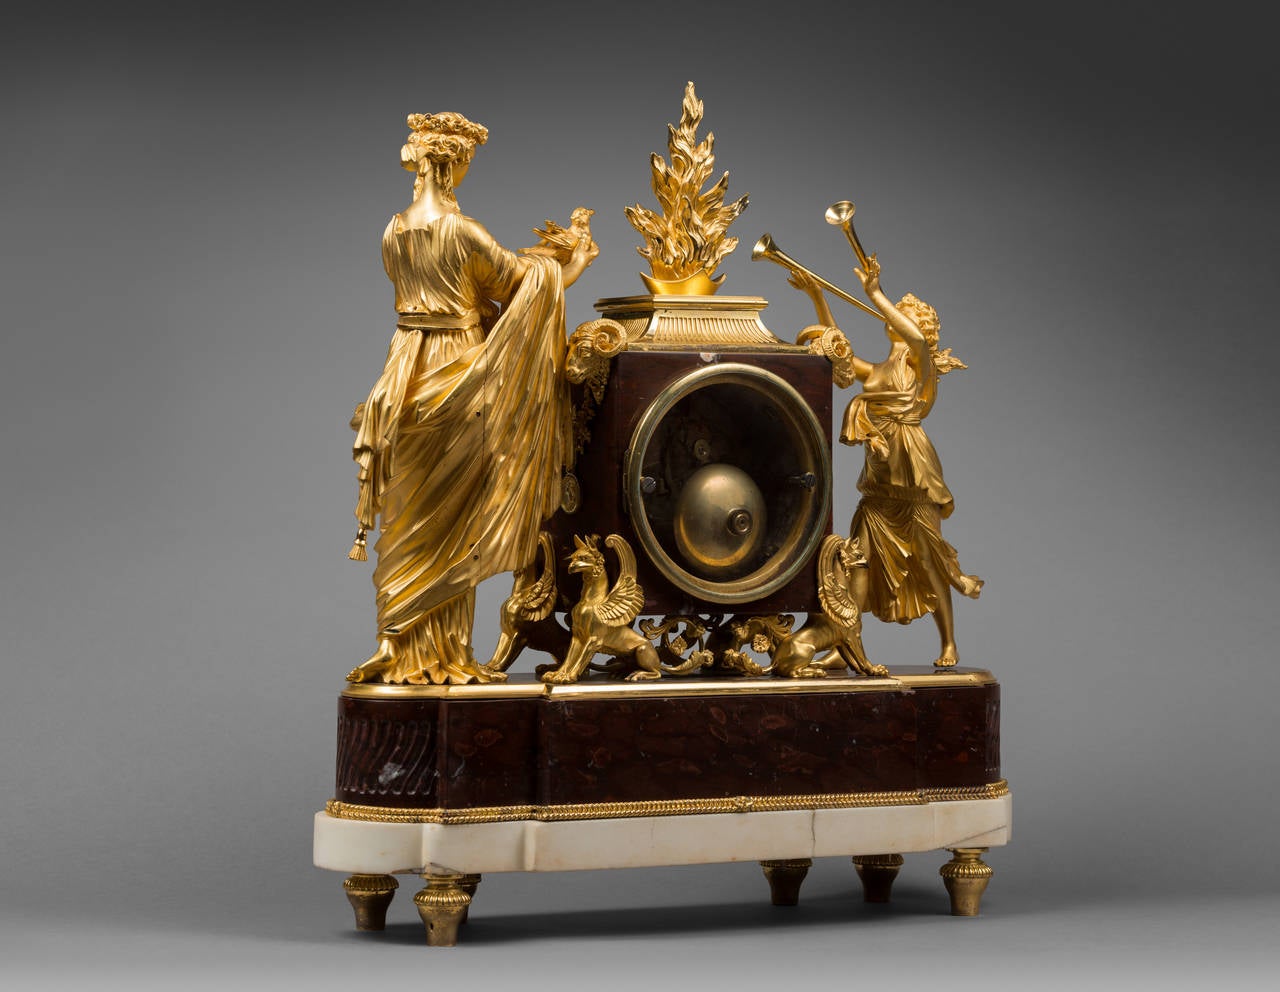 Late 18th Century Louis XVI Mantel Clock by Lamiral, Dial by Coteau, Case Attributed to Thomire